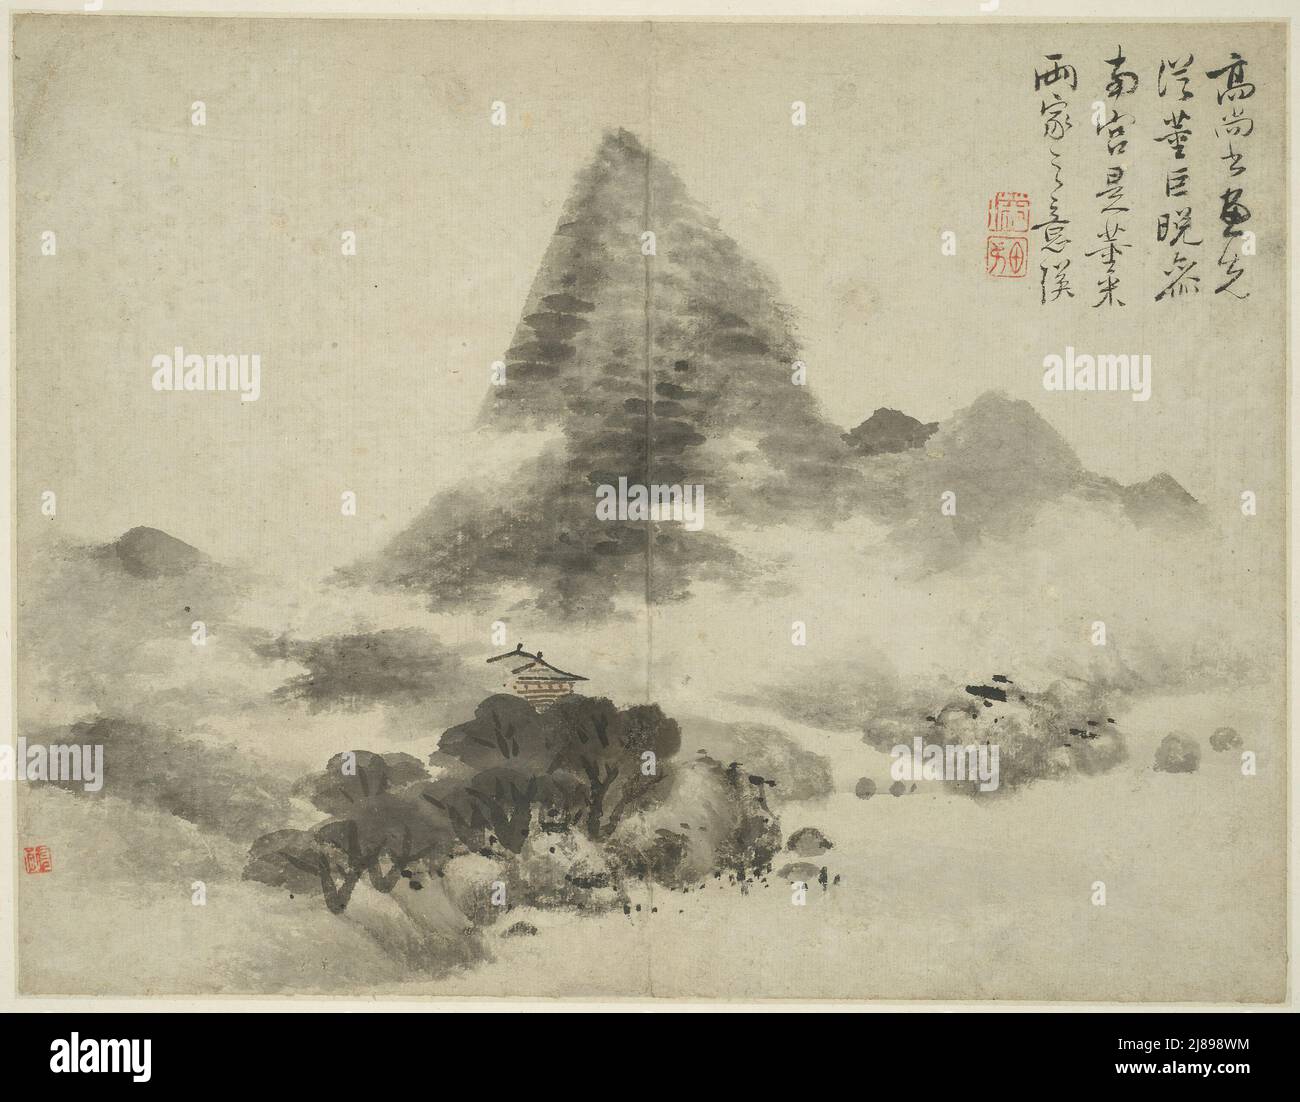 Landscape in the Style of Ancient Masters: after Gao Shangshu, following Dong Yuan (active 937-975) and Ju Ran, and later in the style of Mi Fu (1051 -1107), China, Ming dynasty (1368-1644), 1642. Stock Photo